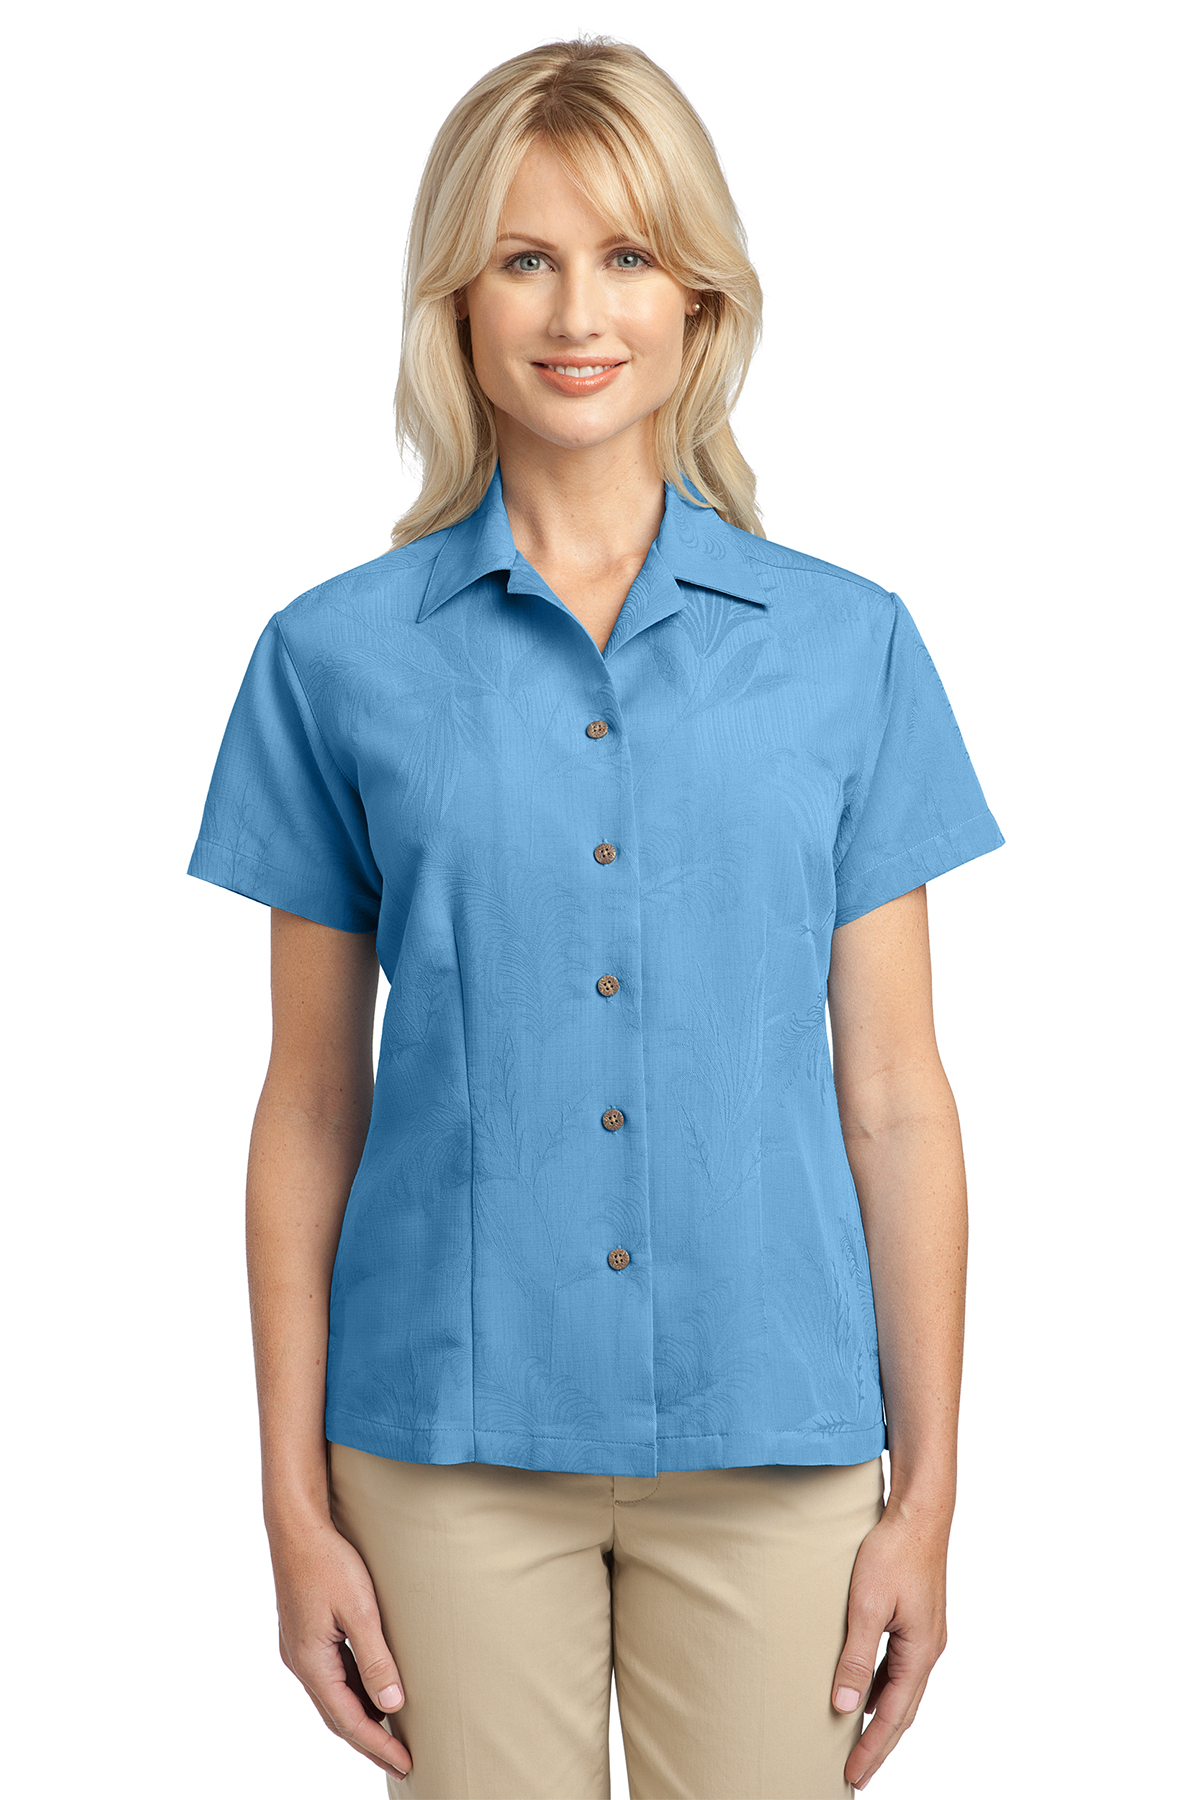 Port Authority Ladies Patterned Easy Care Camp Shirt, Product